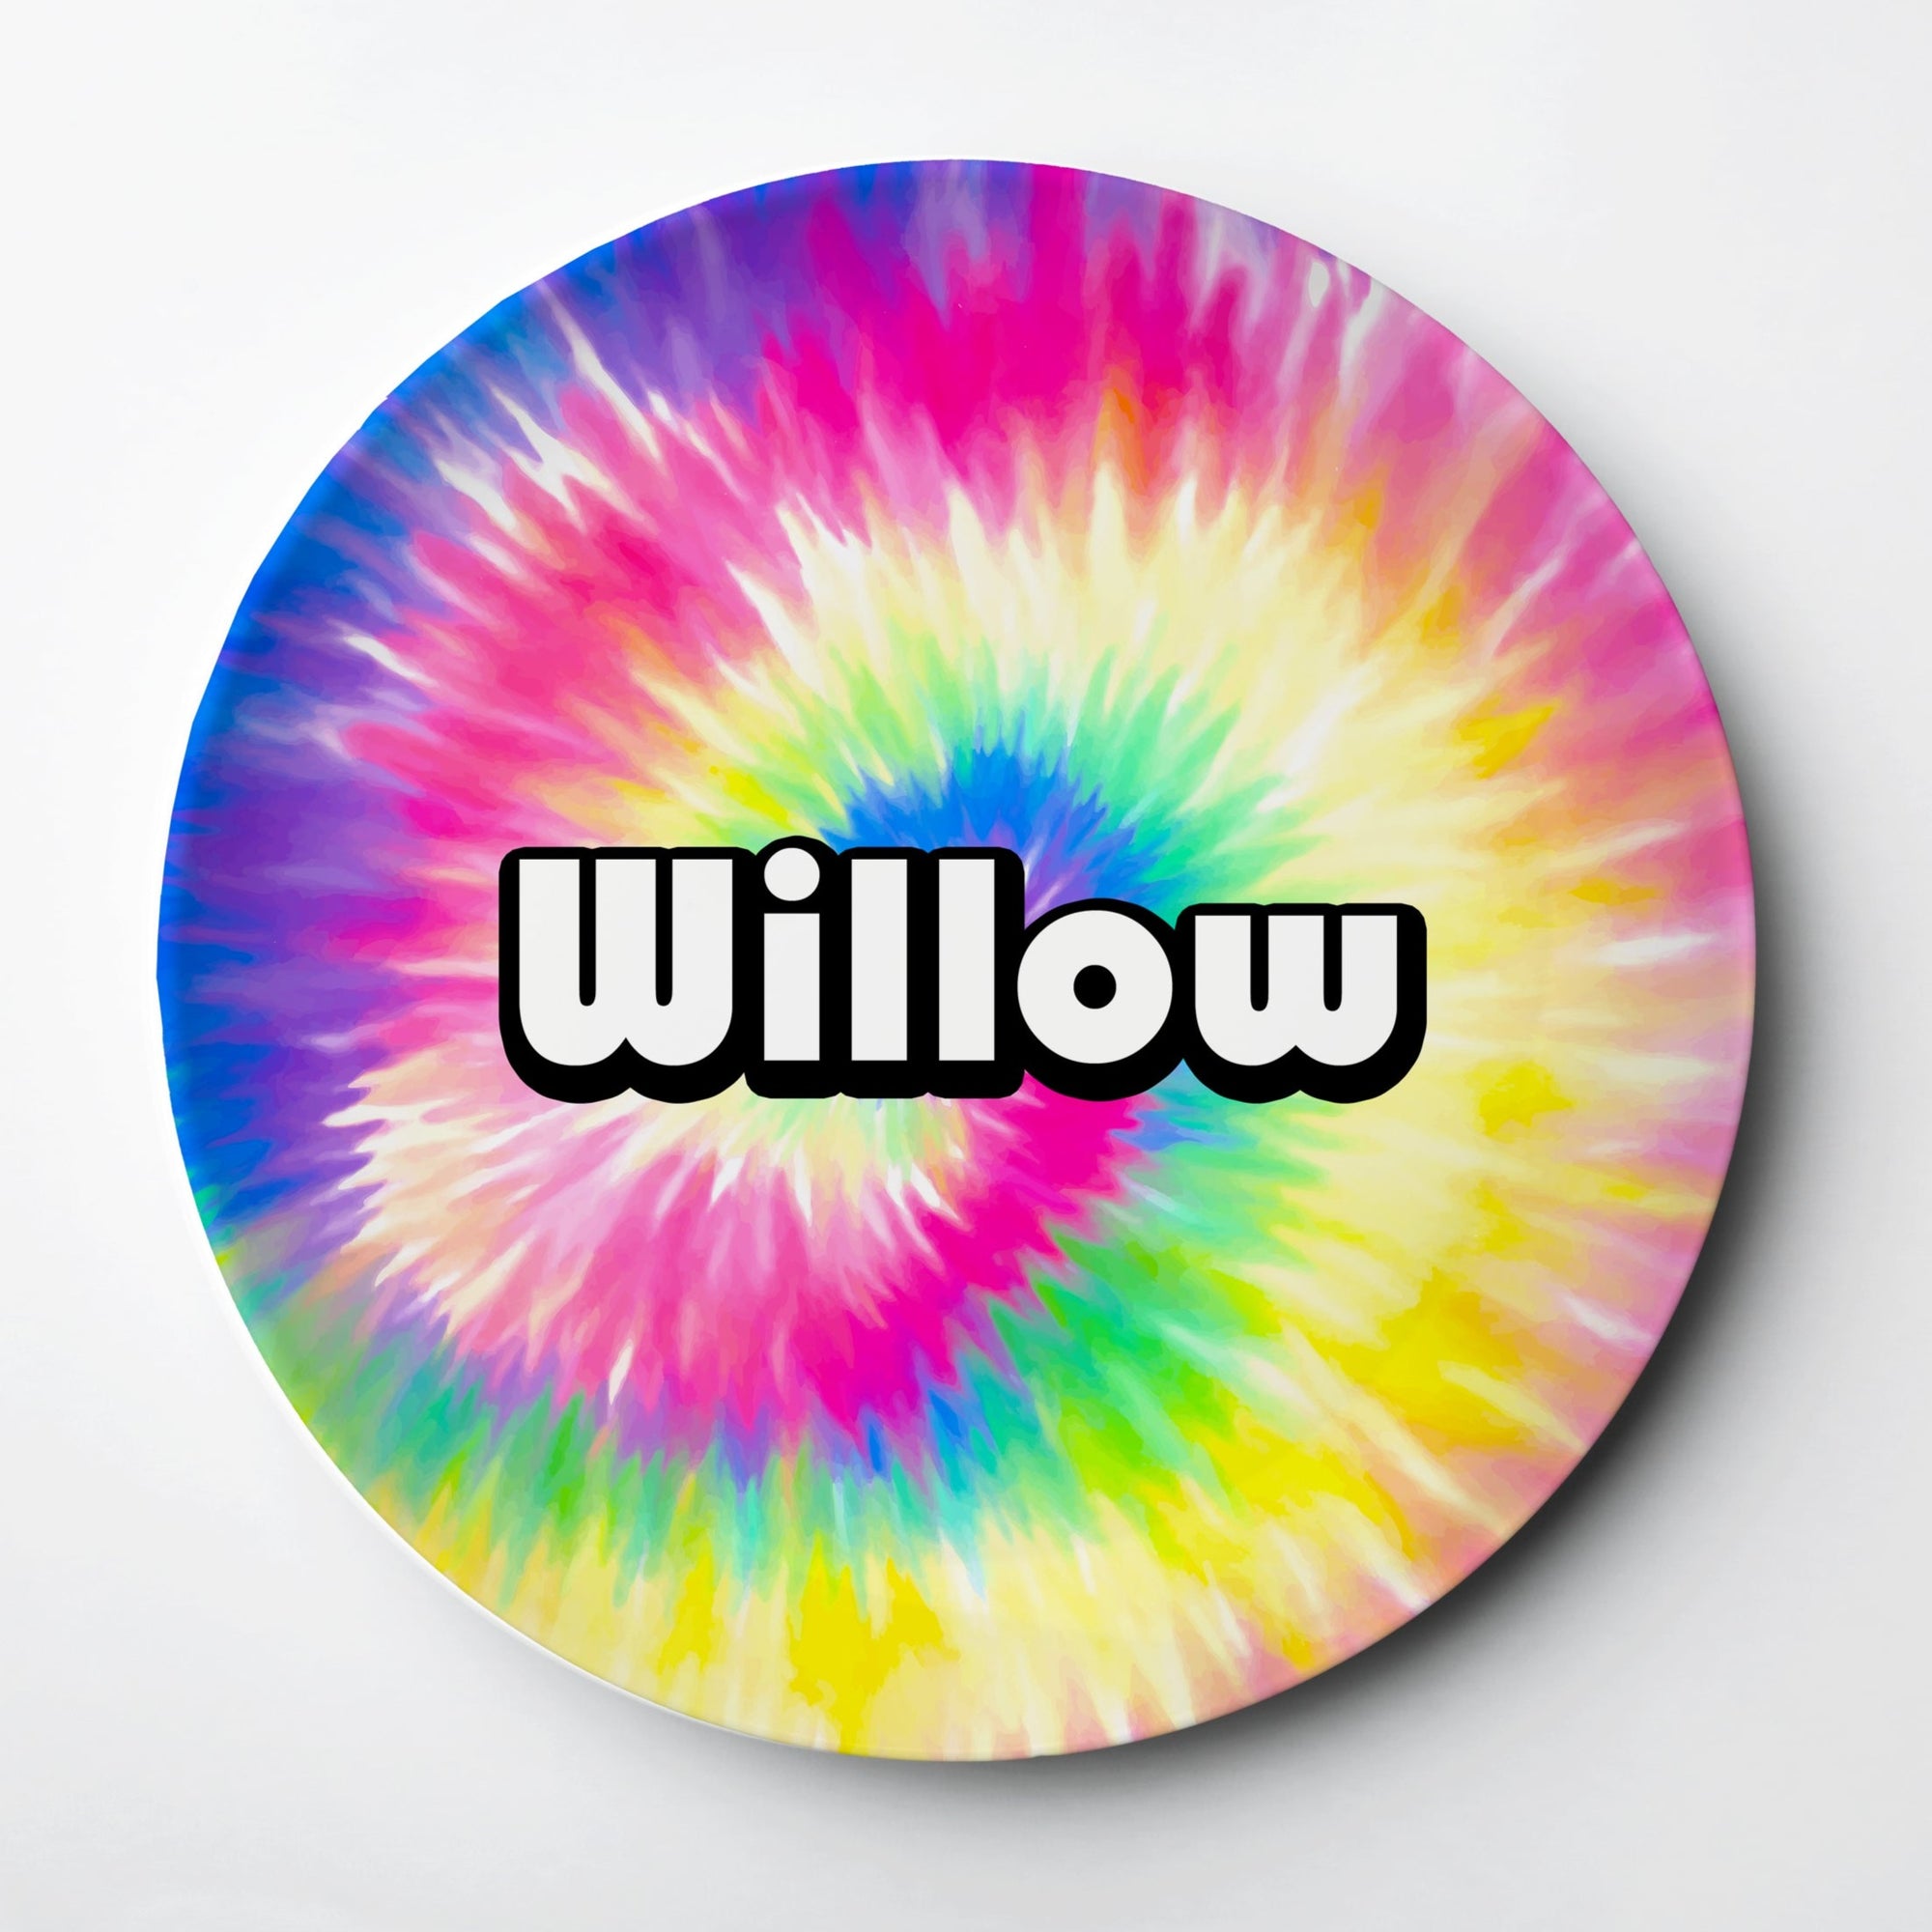 Personalized Kid's Plate with fun tie dye design, Pipsy.com